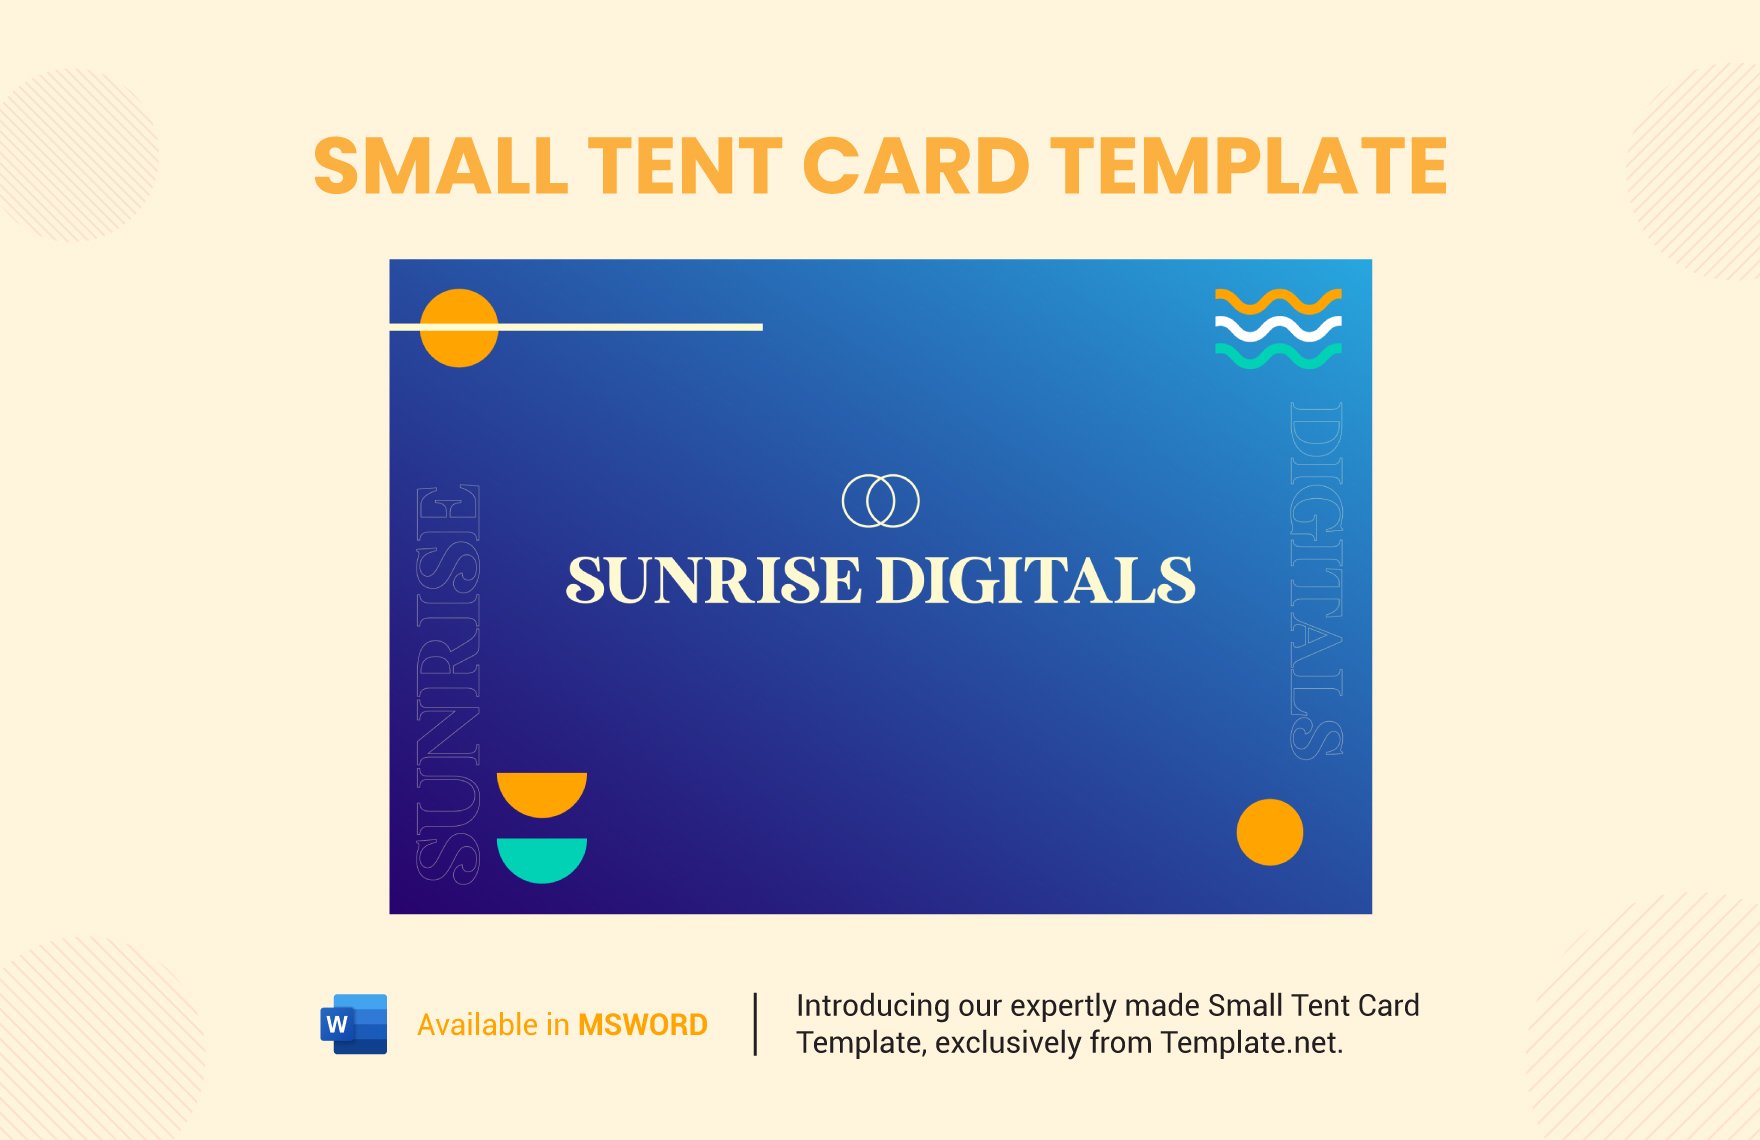 Small Tent Card Template